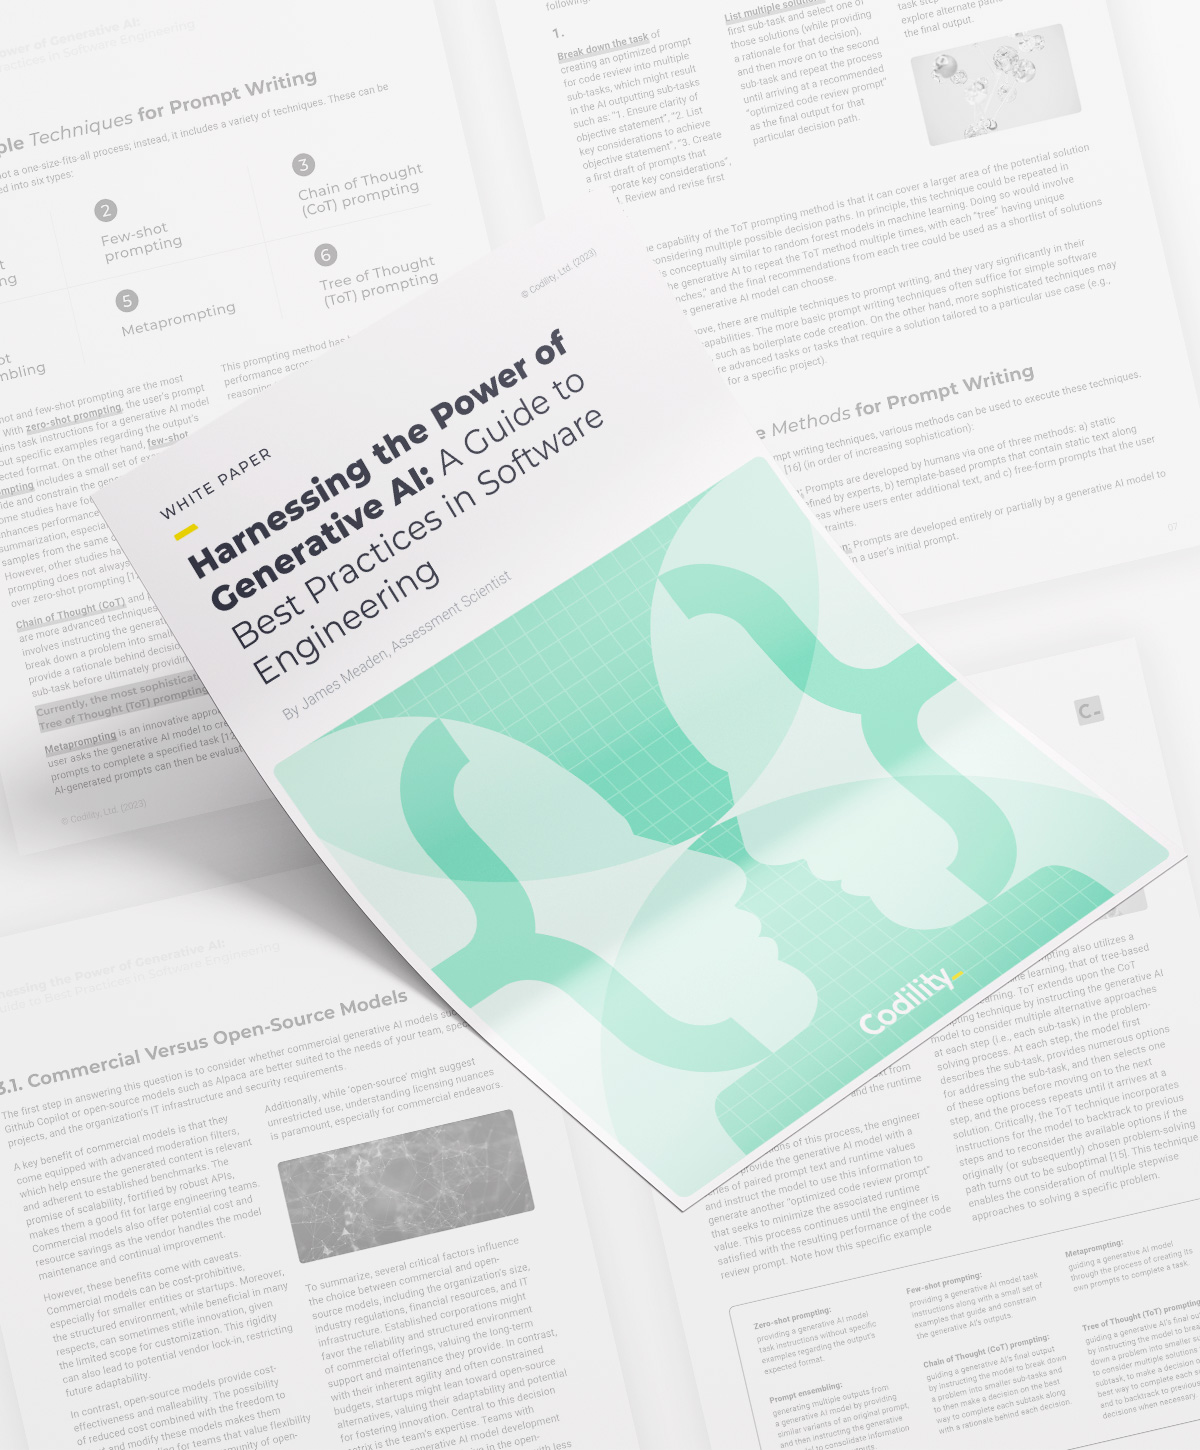 Codility AI Generative whitepaper offers evidence-based best practices and pragmatic tips for working alongside generative AI for software engineering teams.